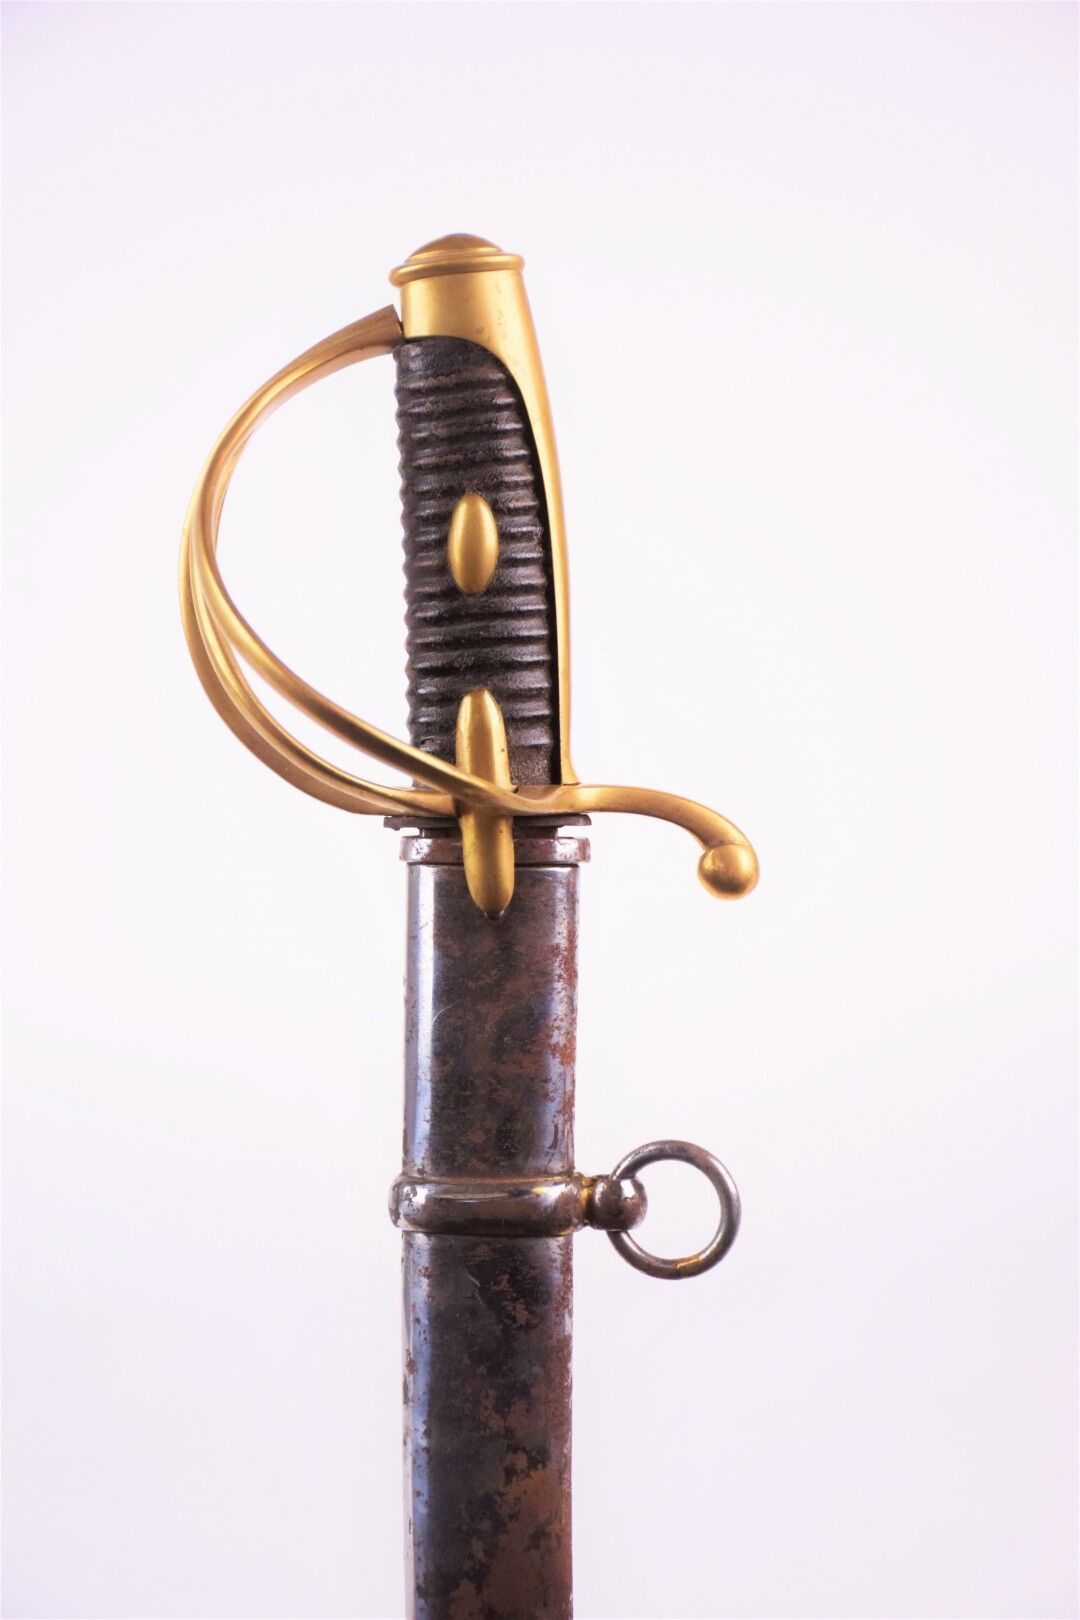 Null 491 bis

Copy of a saber of type AN XI, model troop of light cavalry. Guard&hellip;